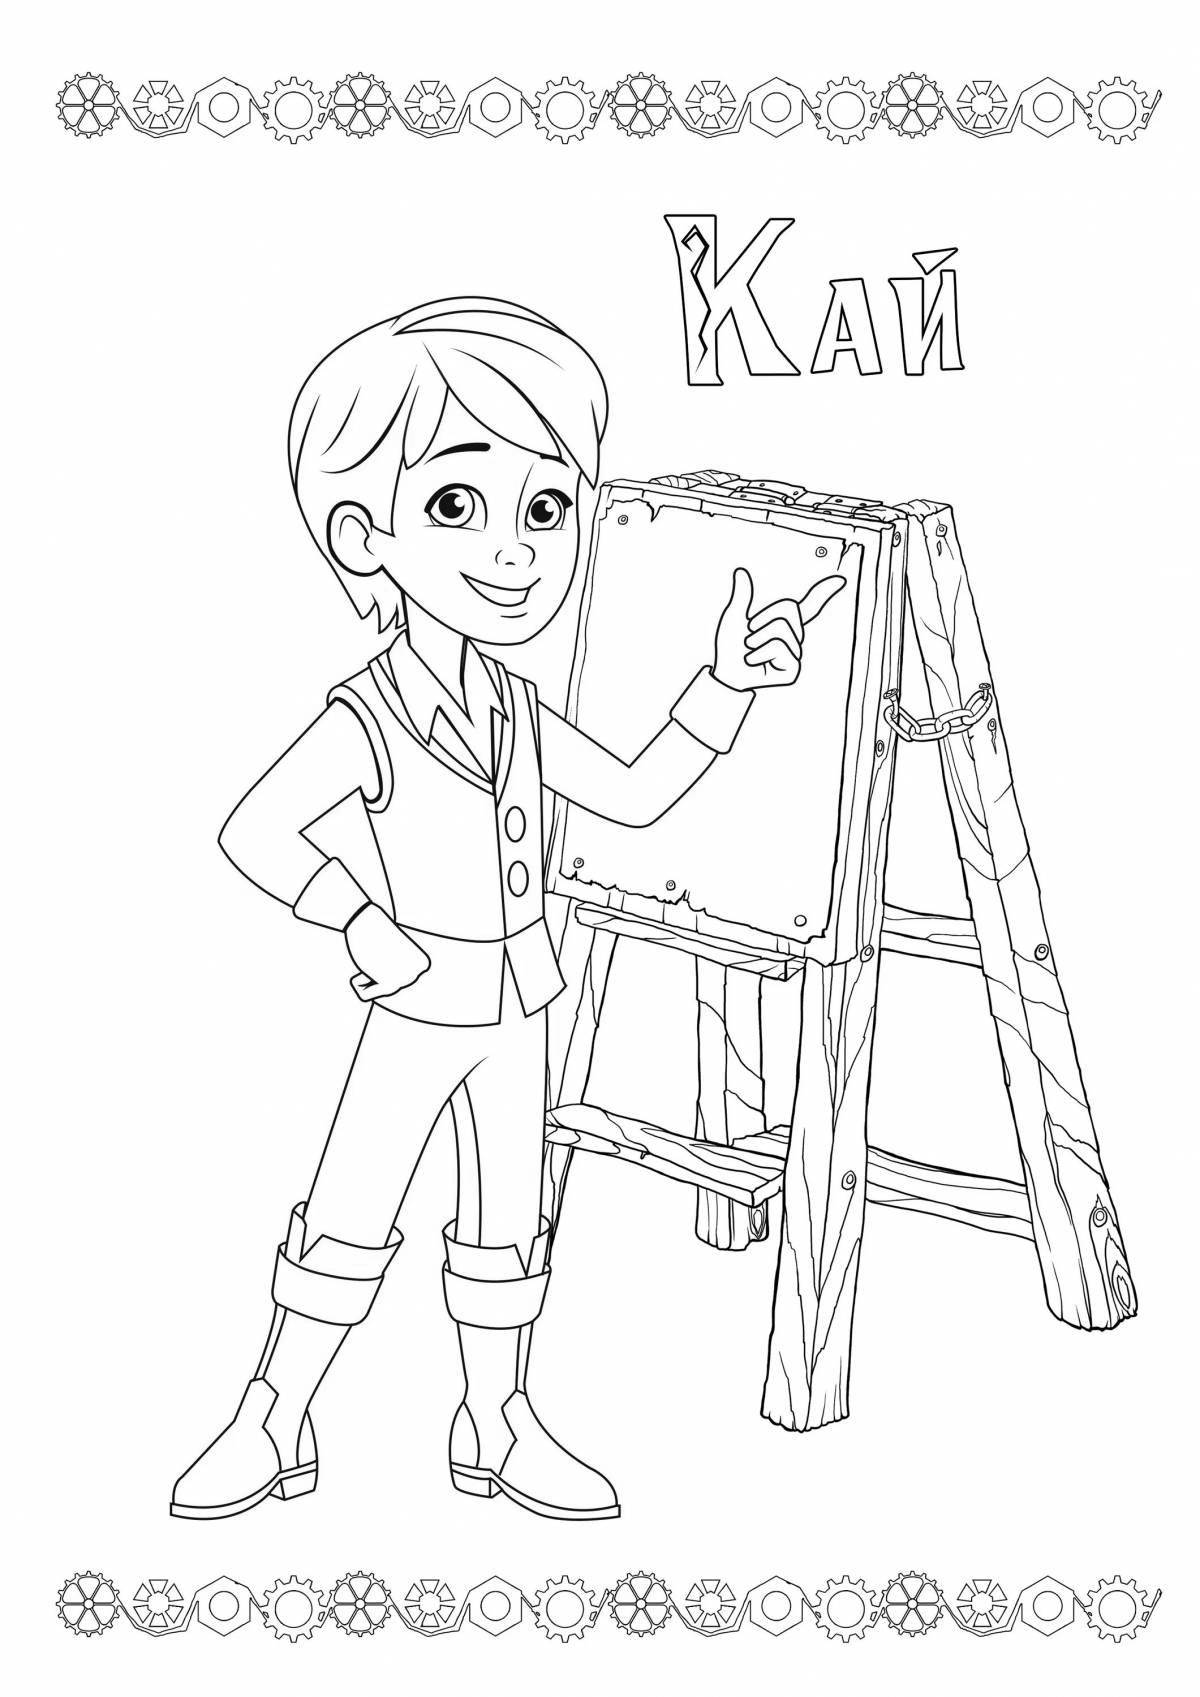 Cheerful Keepers of Wonders coloring page